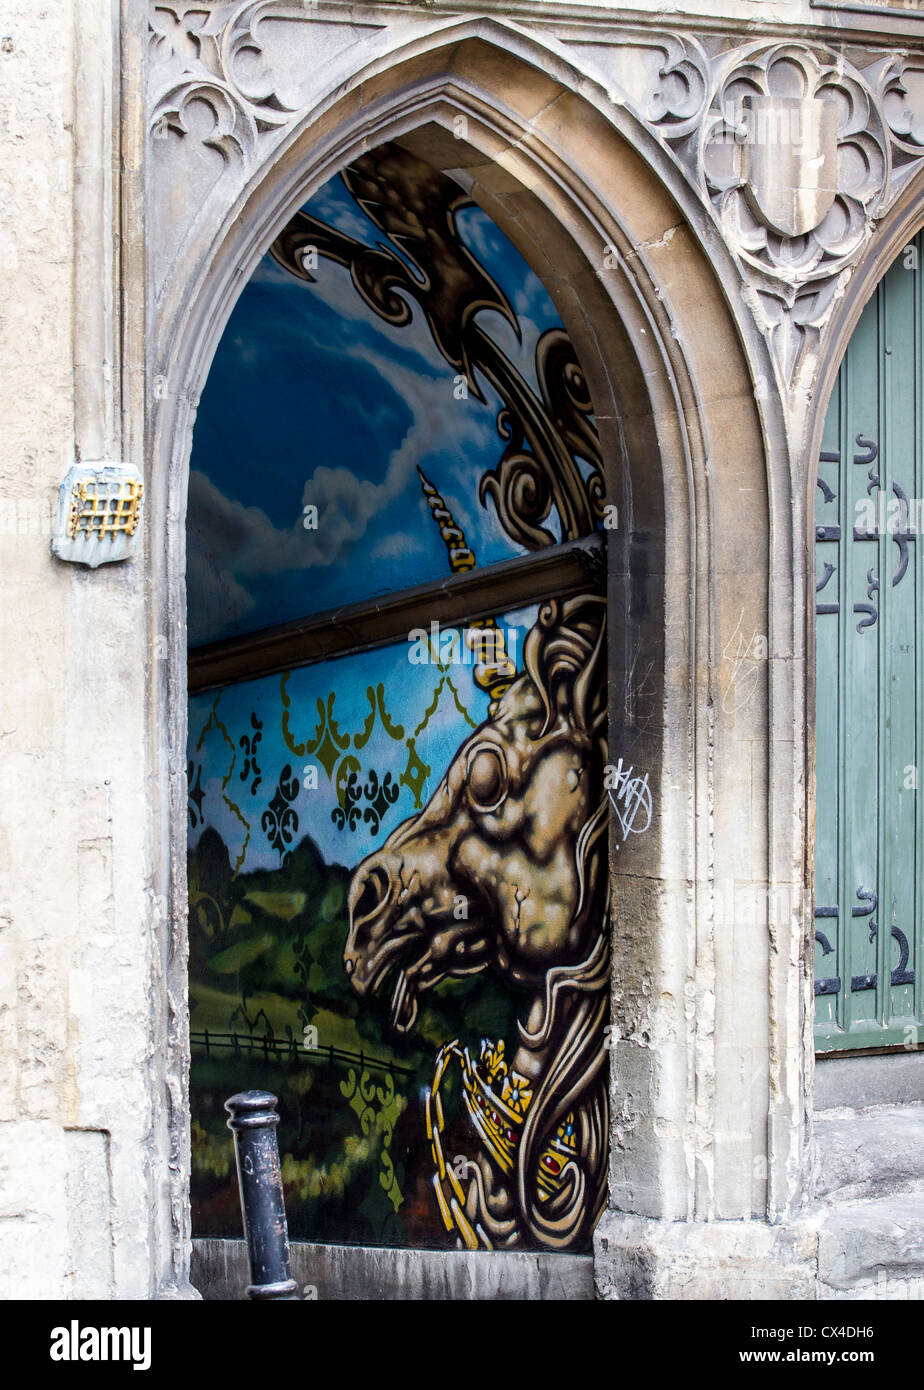 Mural depicting fantastical and mythical creatures at St. John's Gate in Bristol Stock Photo